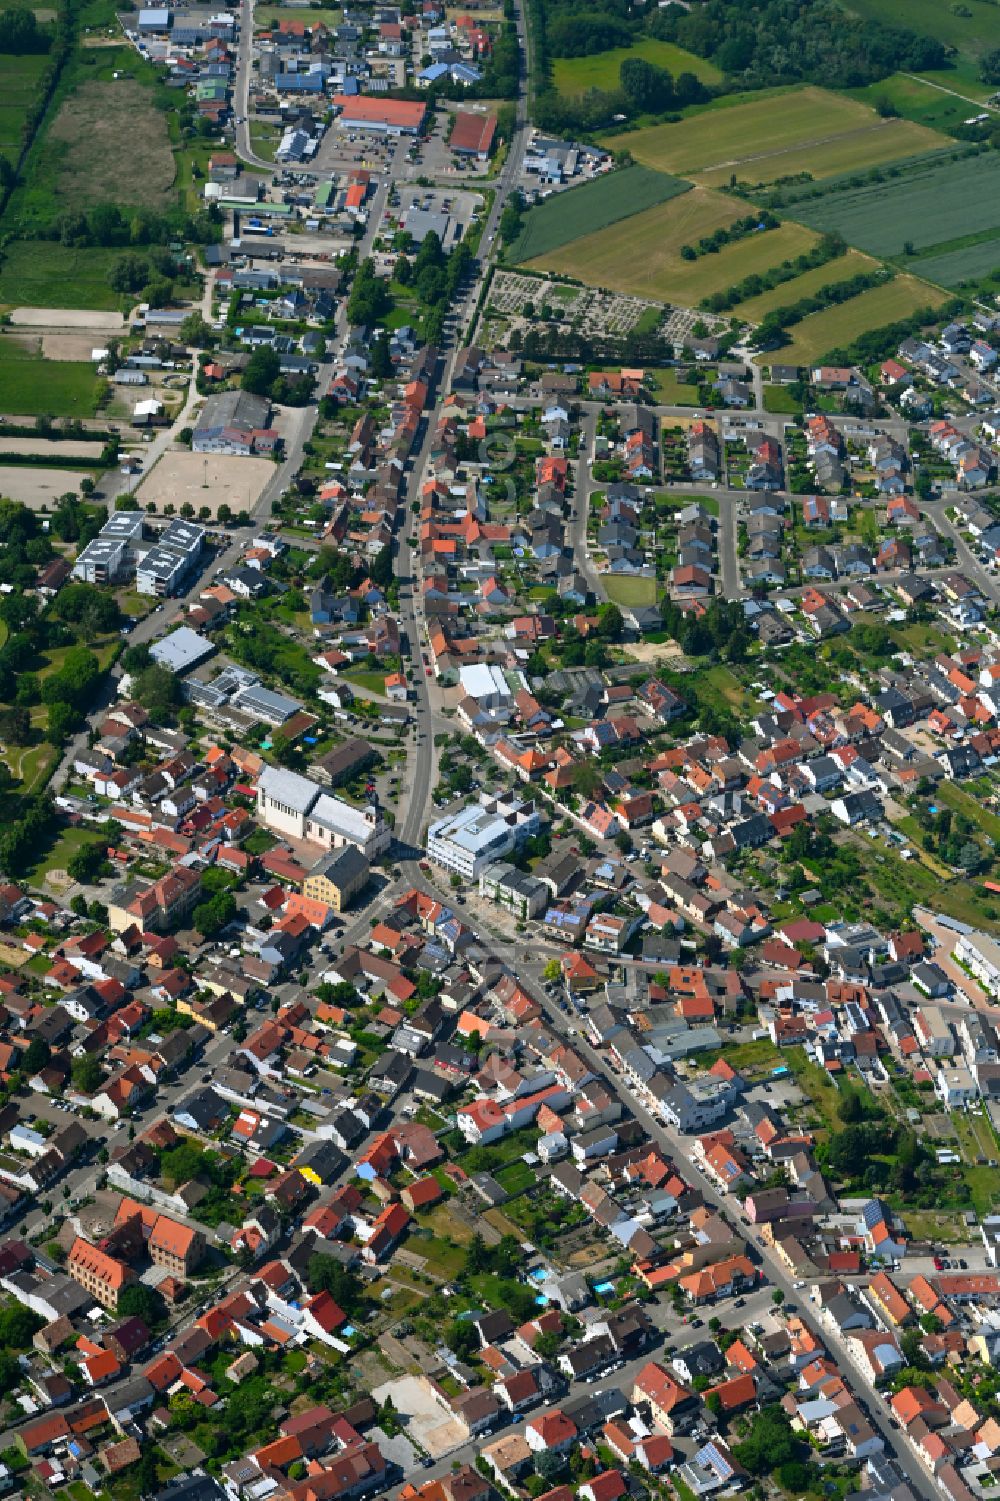 Aerial image Oberhausen - The city center in the downtown area in Oberhausen in the state Baden-Wuerttemberg, Germany